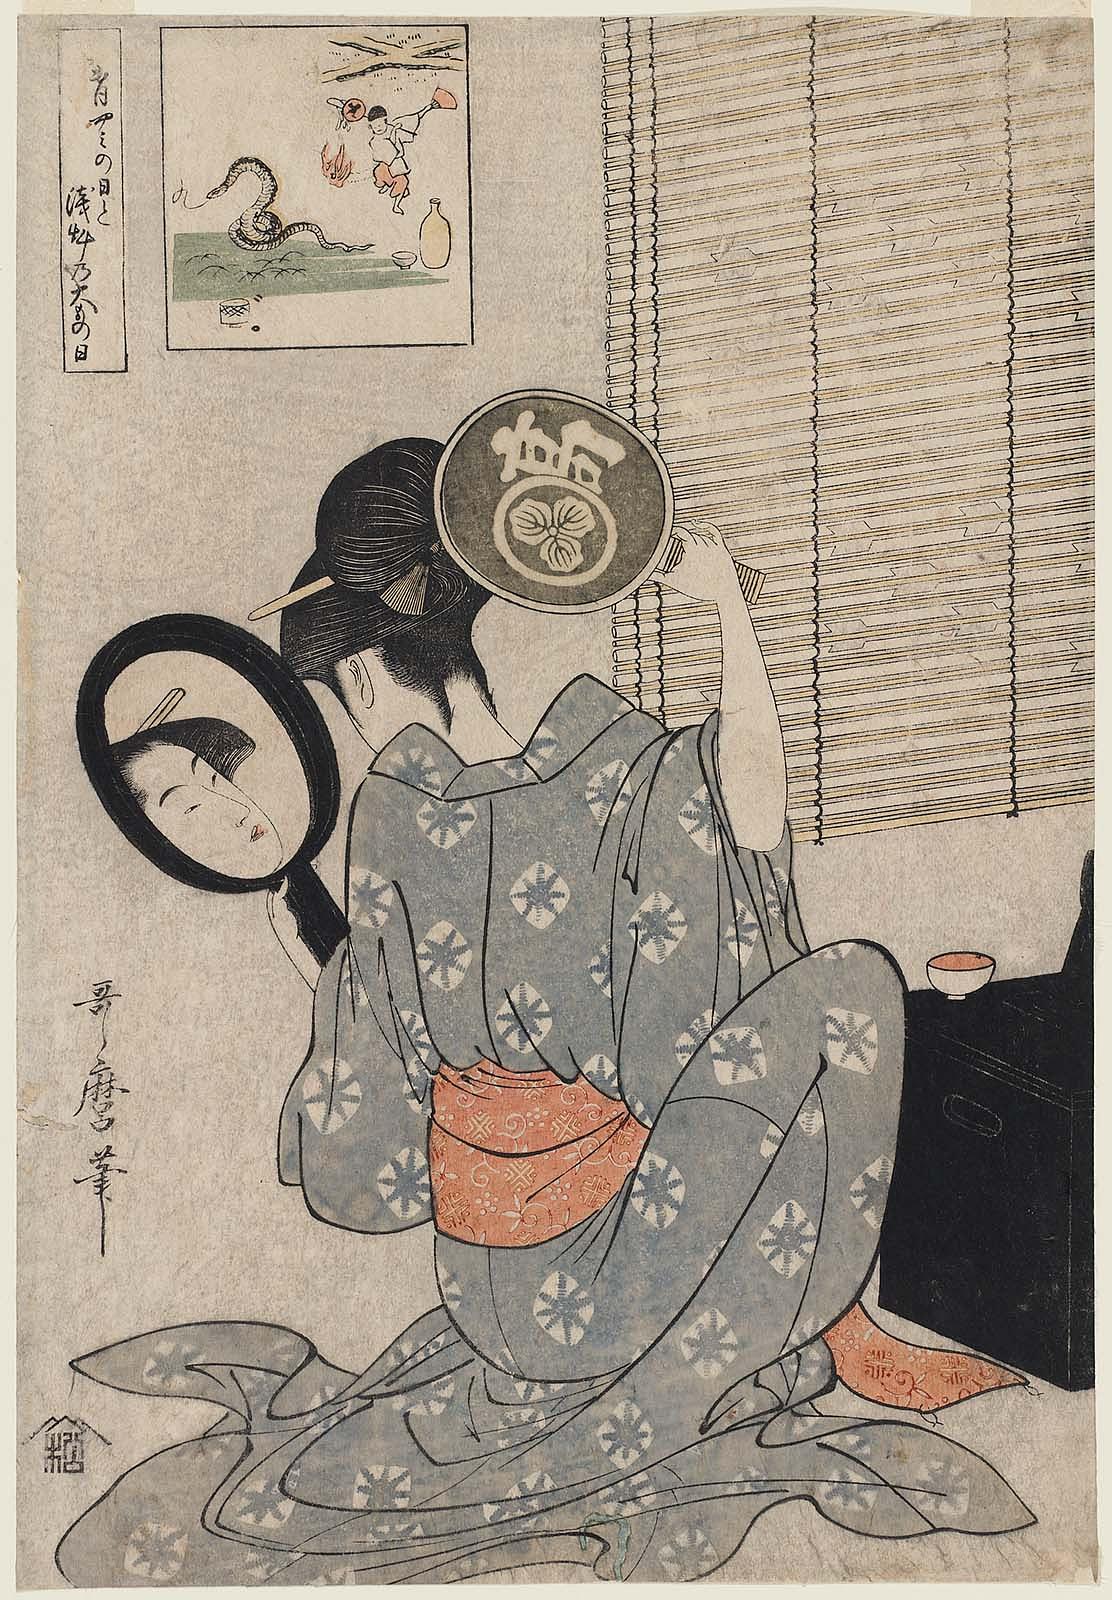 Japanese woman grooming herself and looking in the mirror